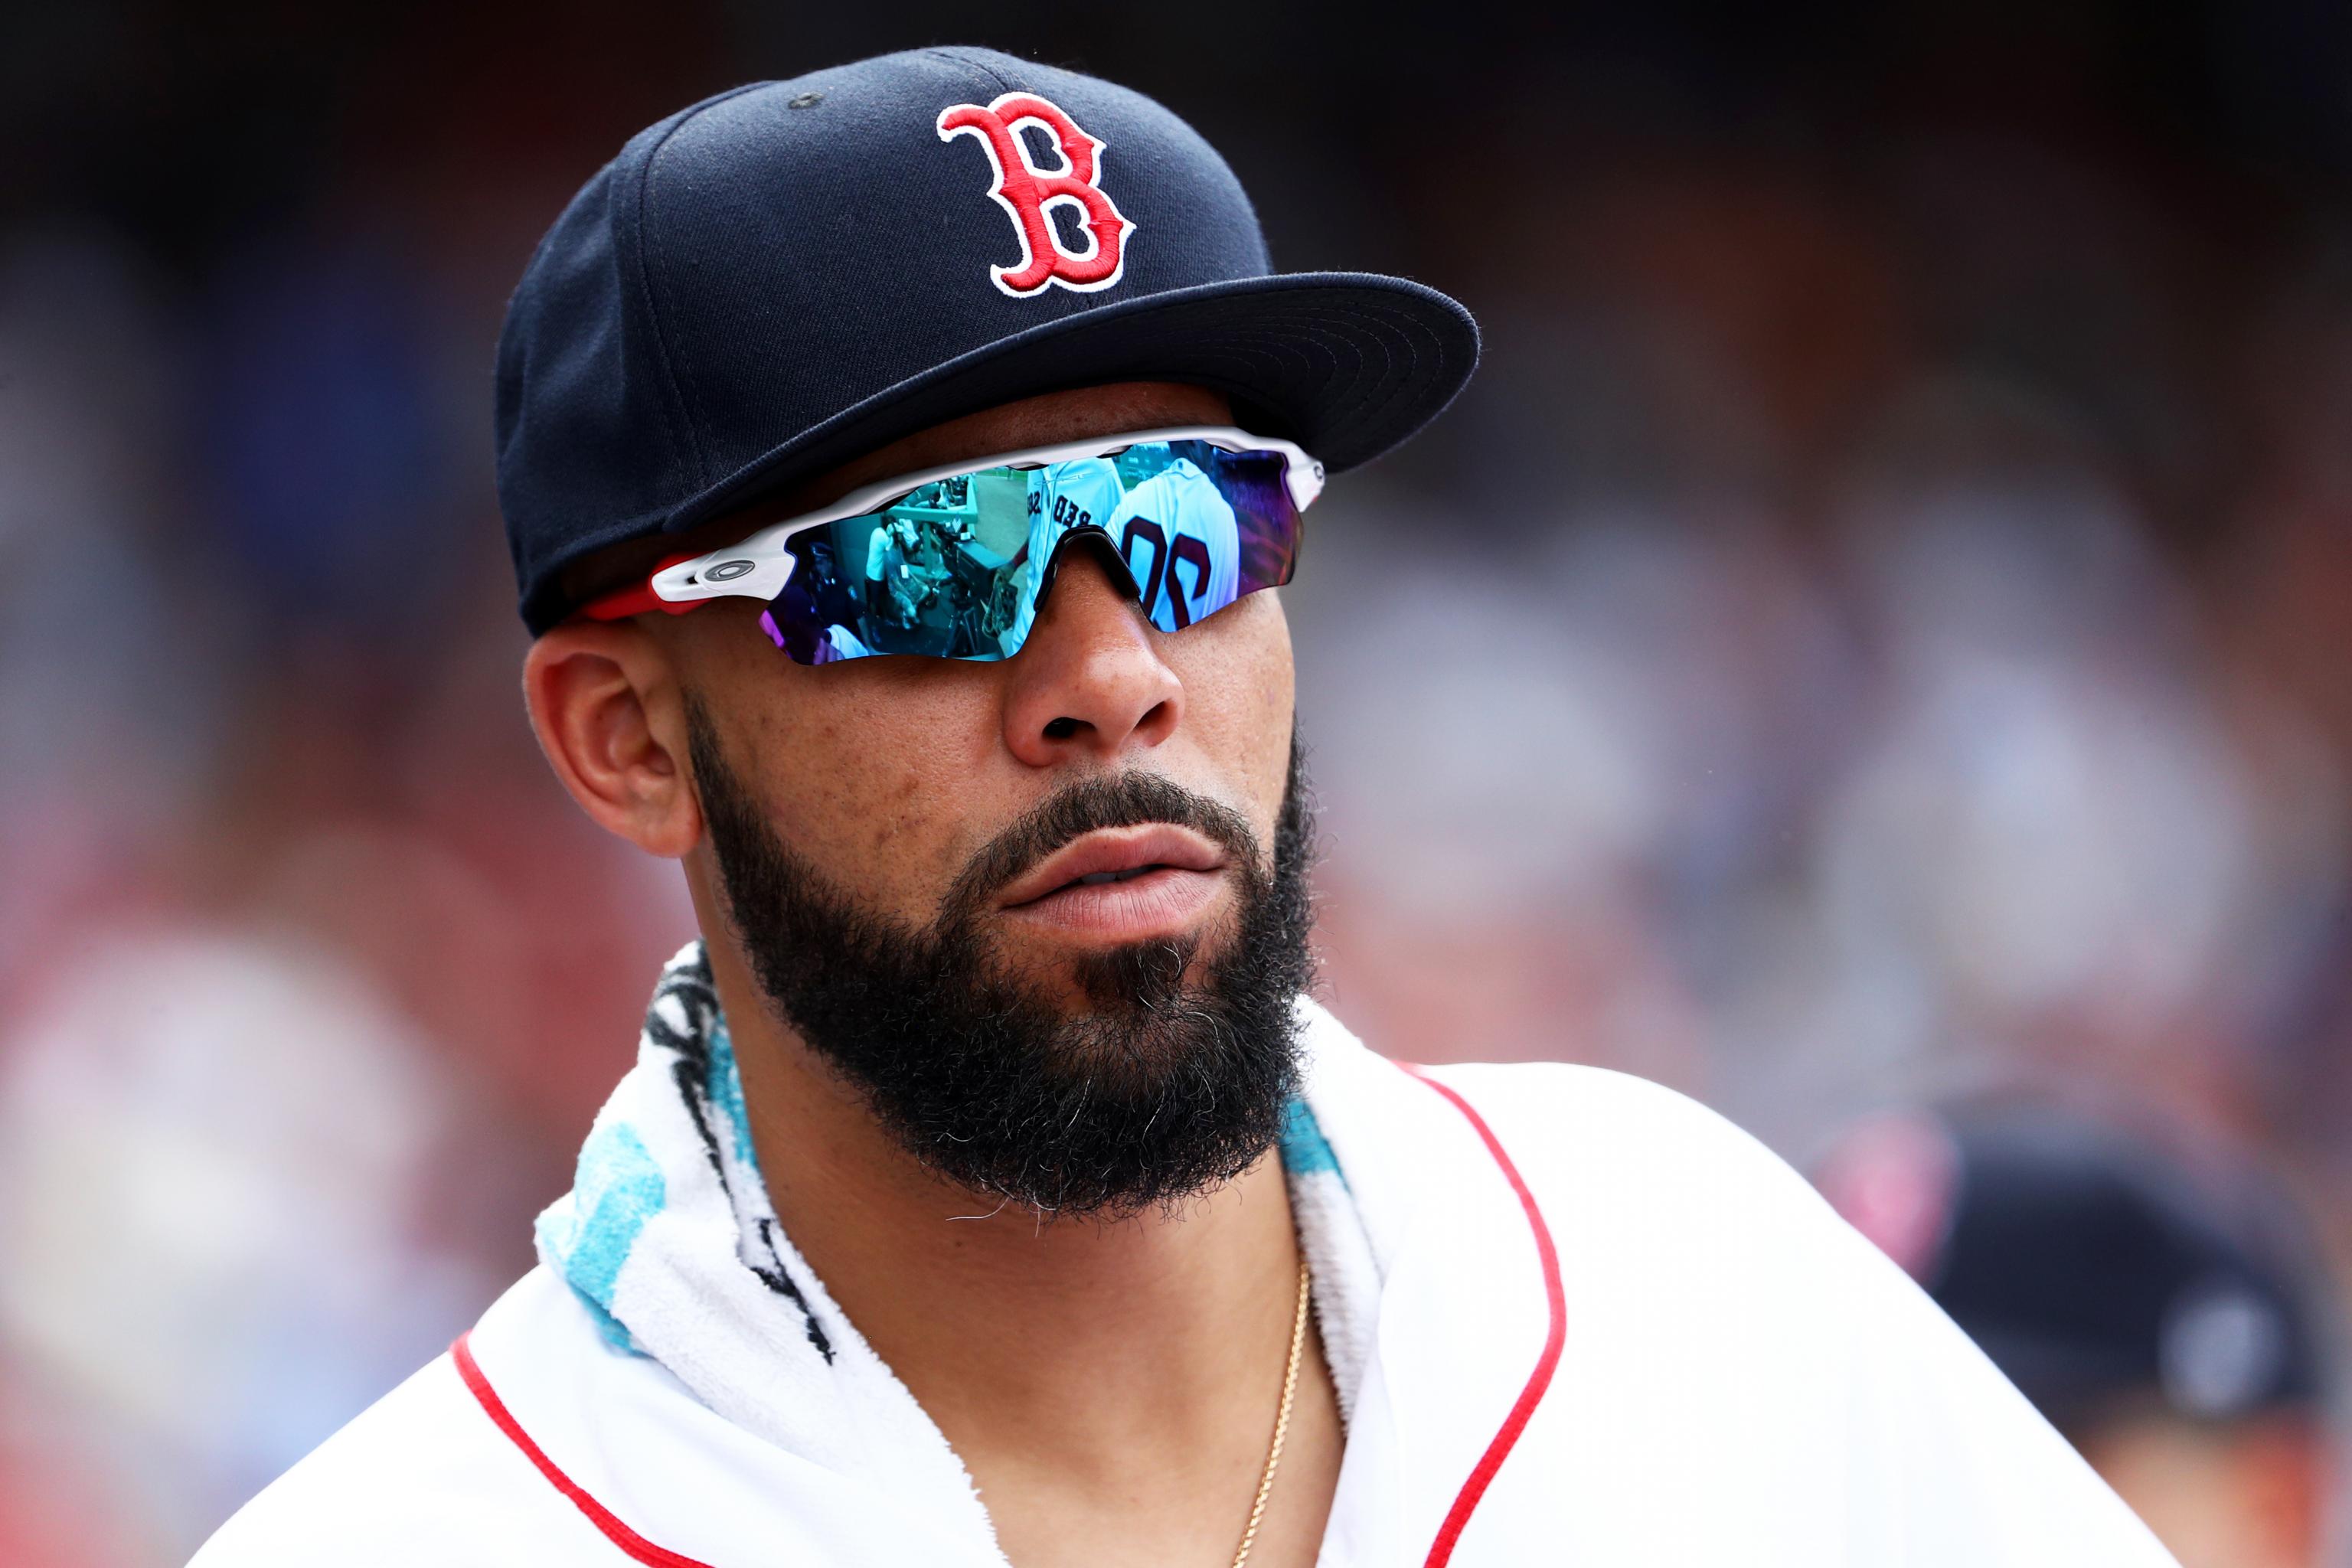 David Price 'shocked' that confrontation with Dennis Eckersley